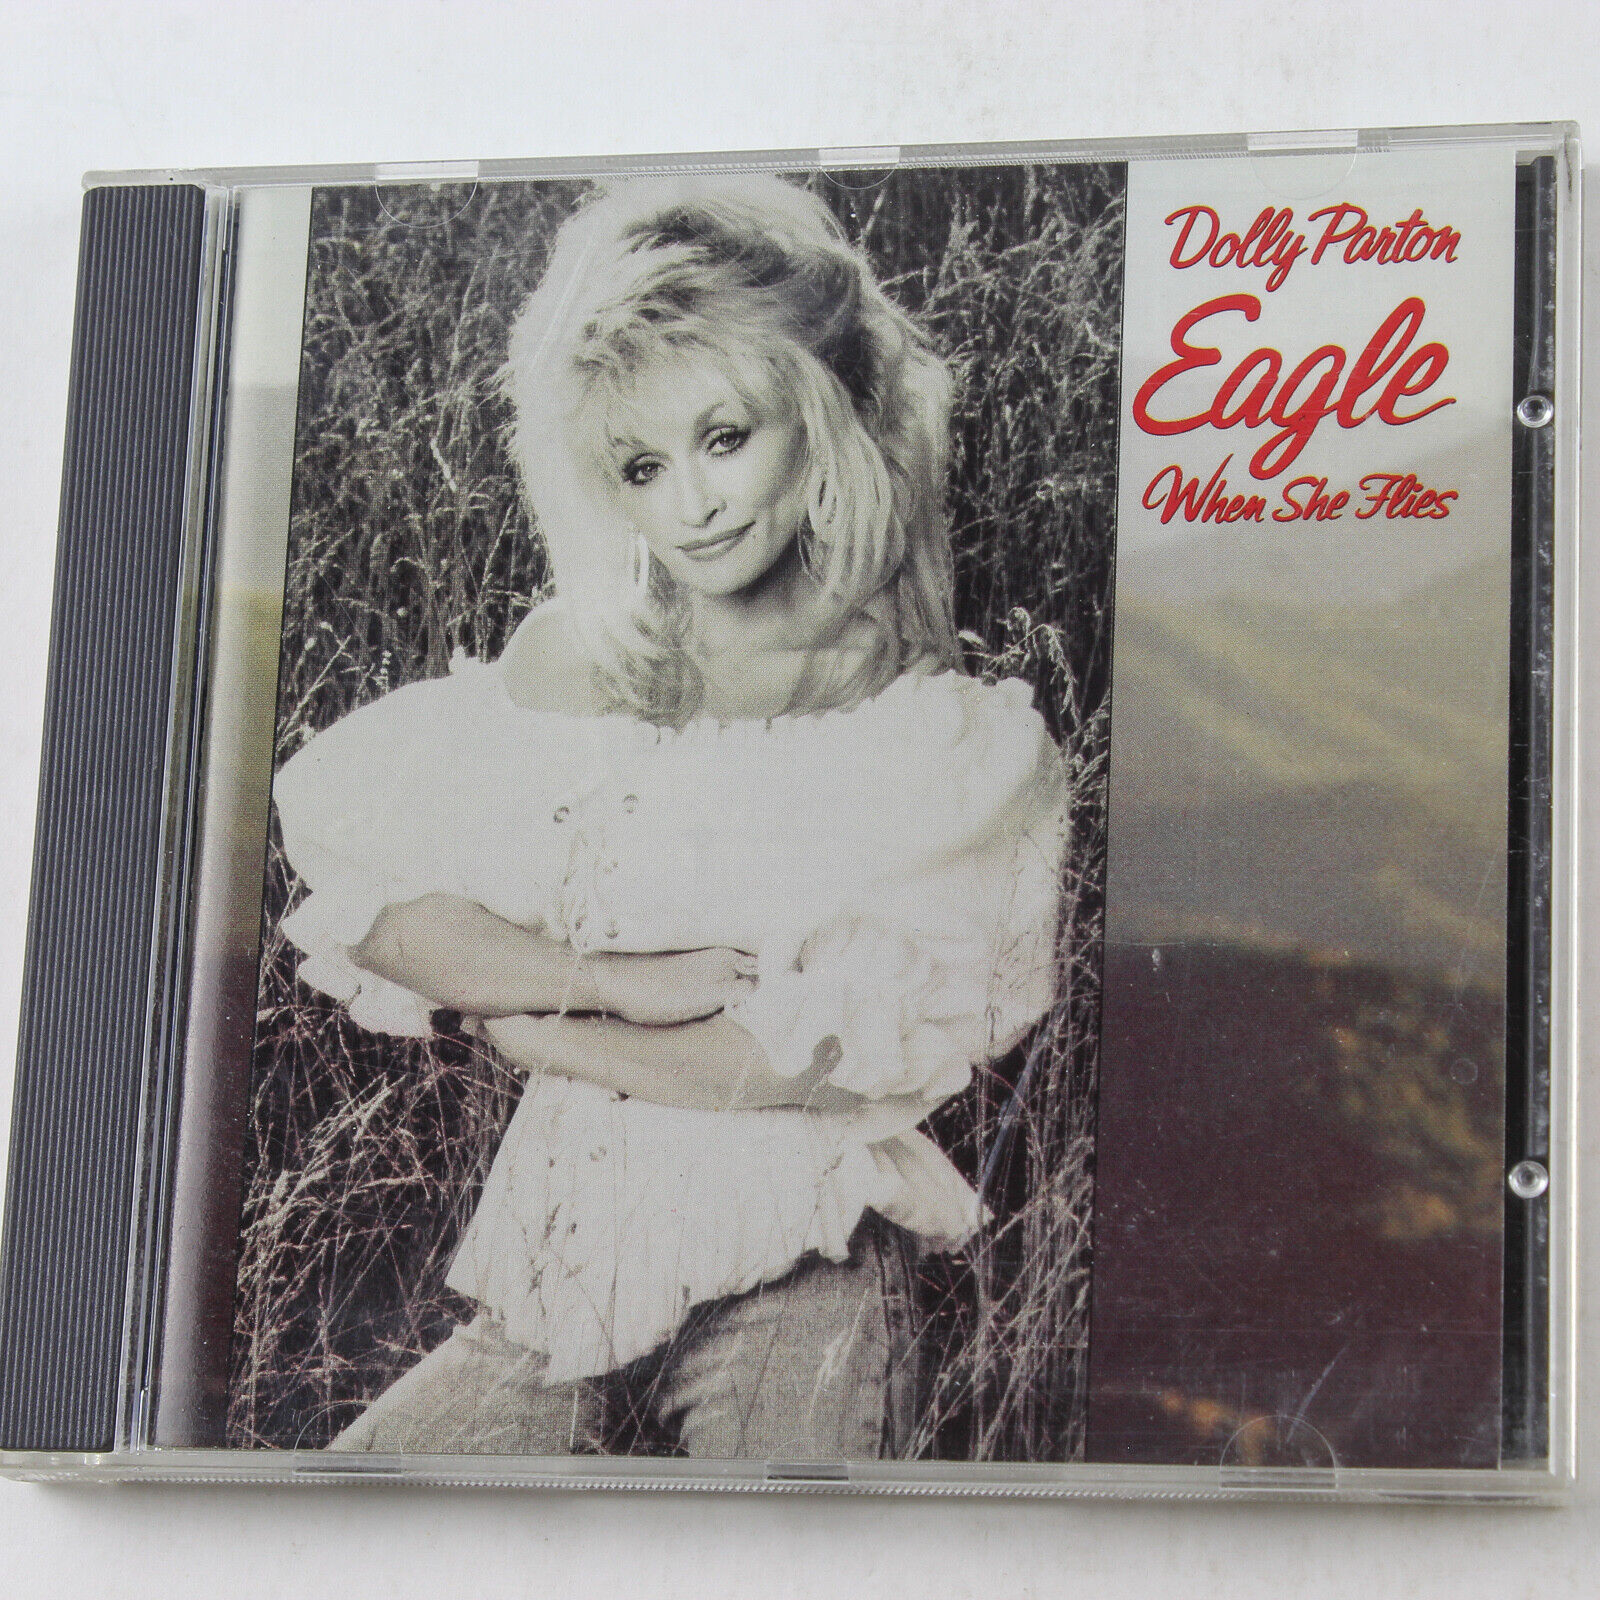 Eagle When She Flies Dolly Parton CD 1991 Columbia Country Music